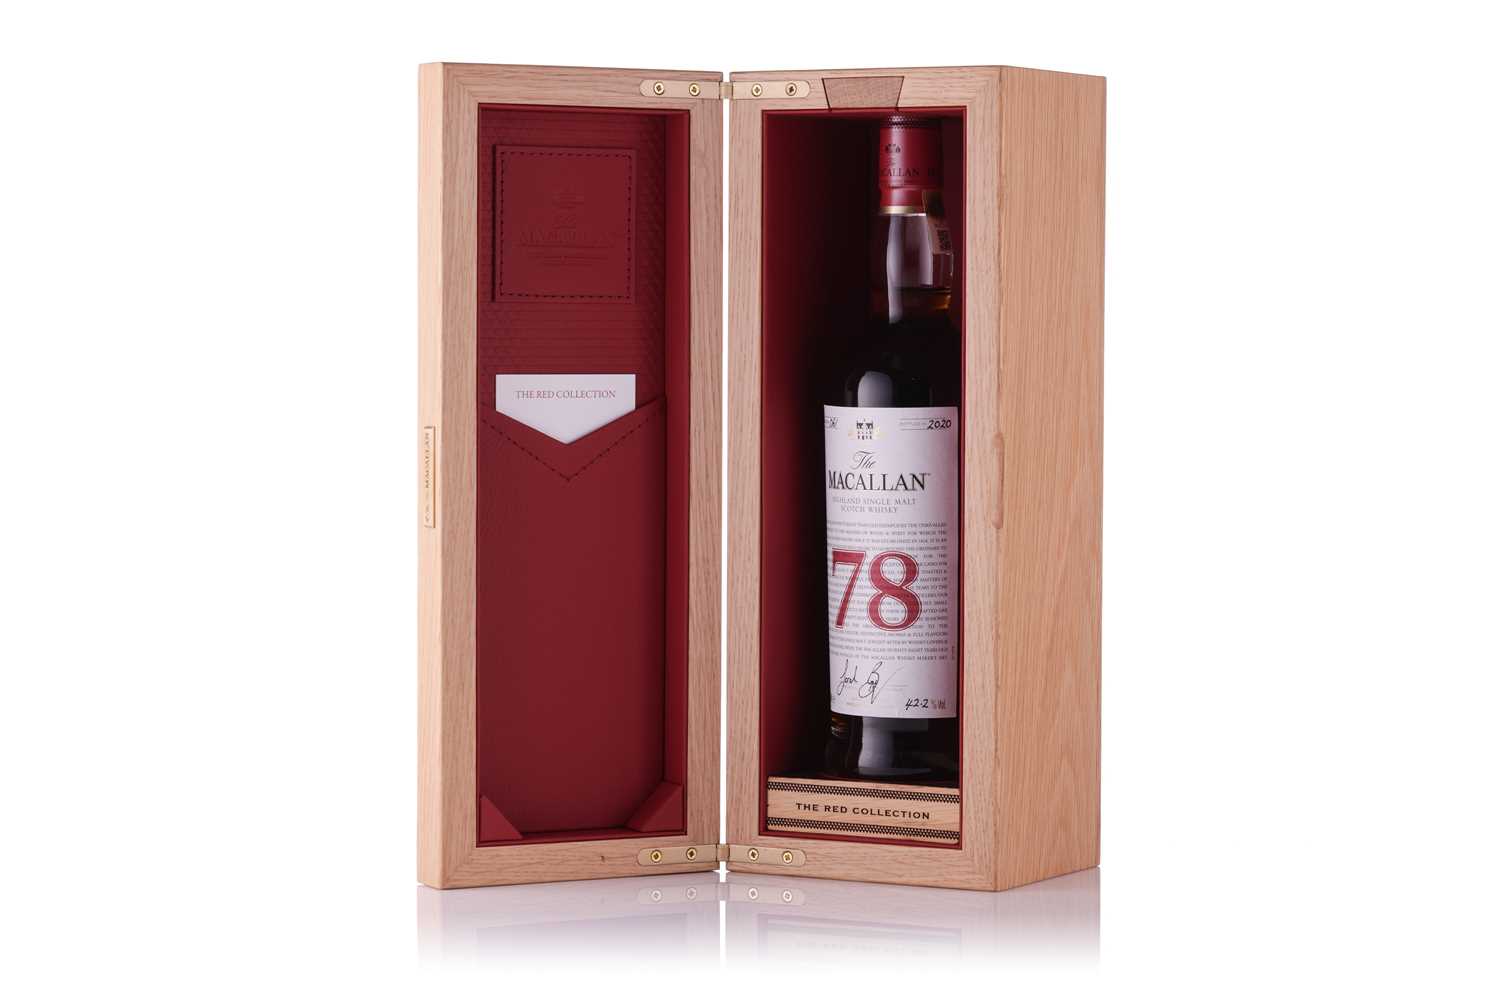 The Macallan 78 year old, The Red Collection. Distilled and bottled by The Macallan Distillery Ltd - Image 5 of 13